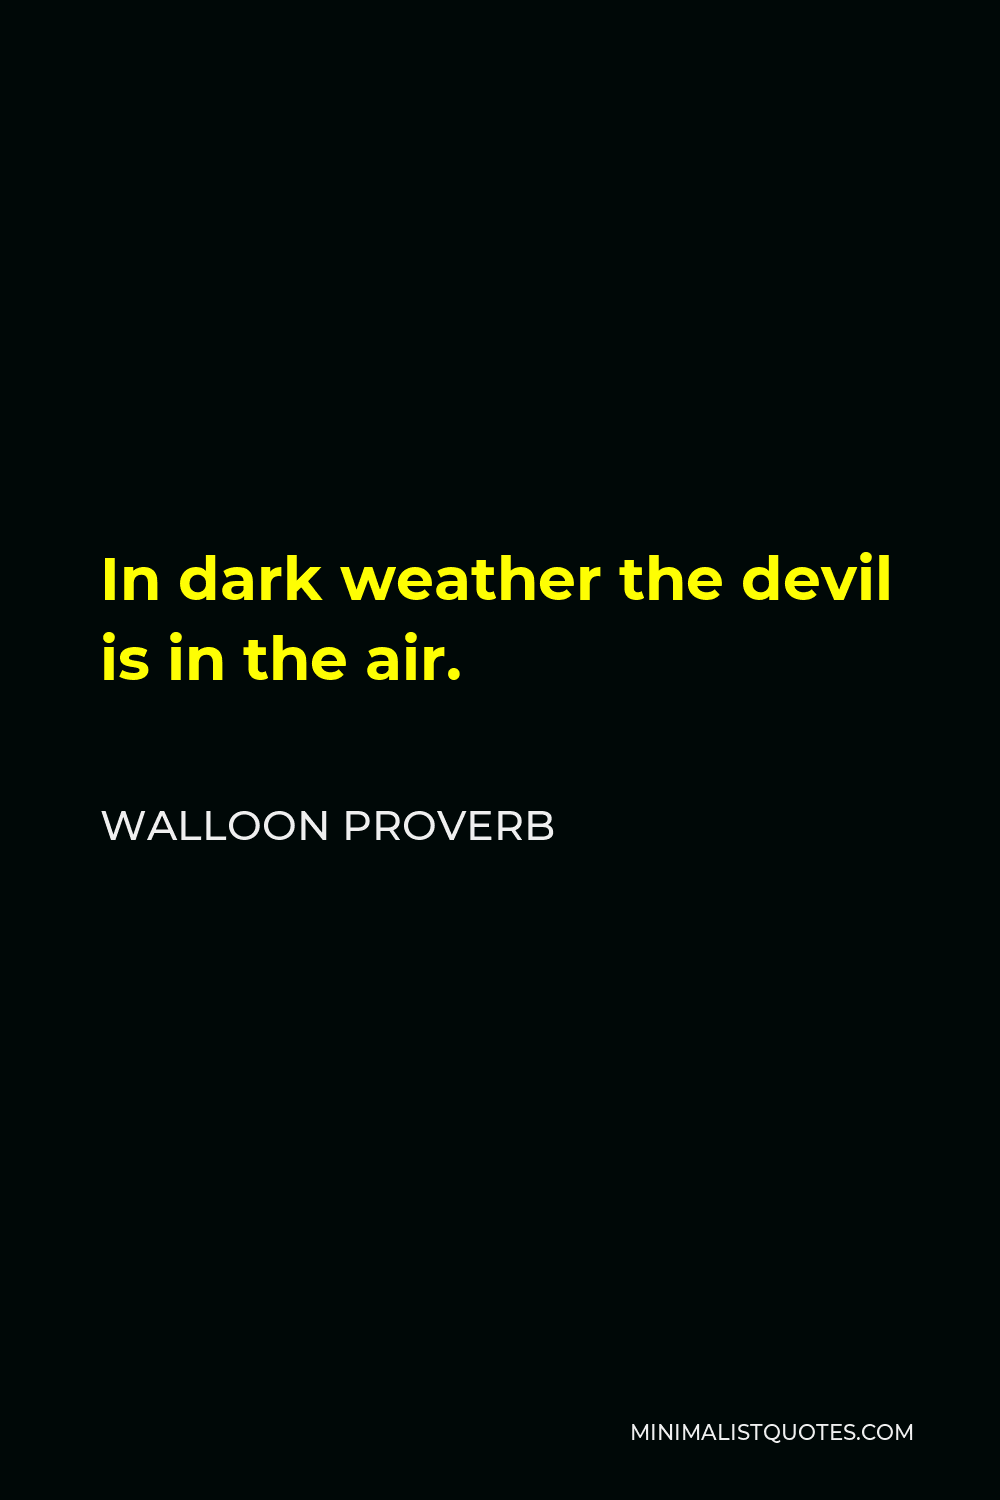 Walloon Proverb Quote - In dark weather the devil is in the air.